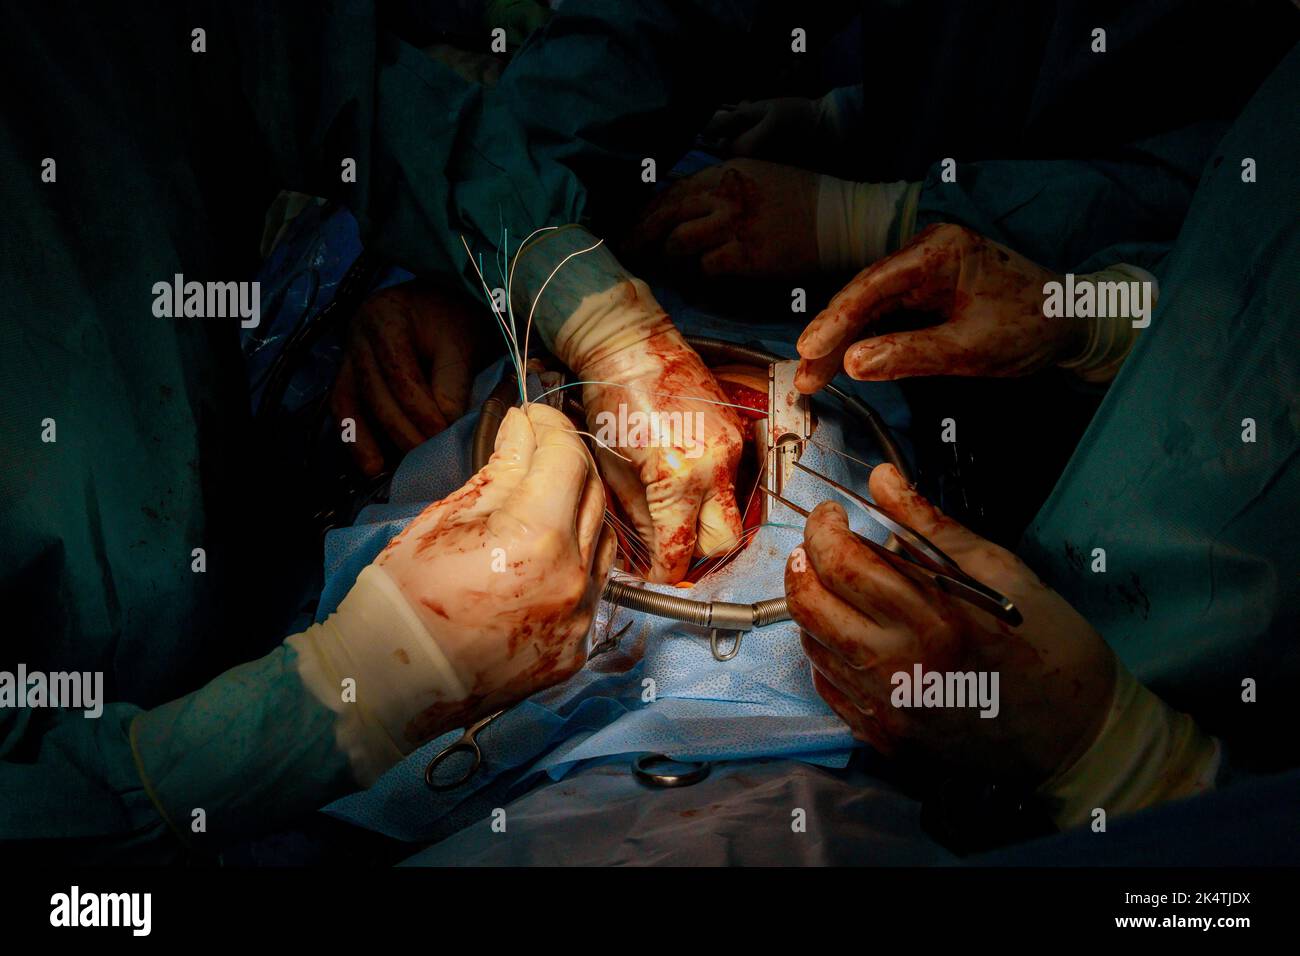 The coronary artery bypass graft CABG procedure is performed for heart operations due to coronary heart disease in the operating room of the hospital Stock Photo